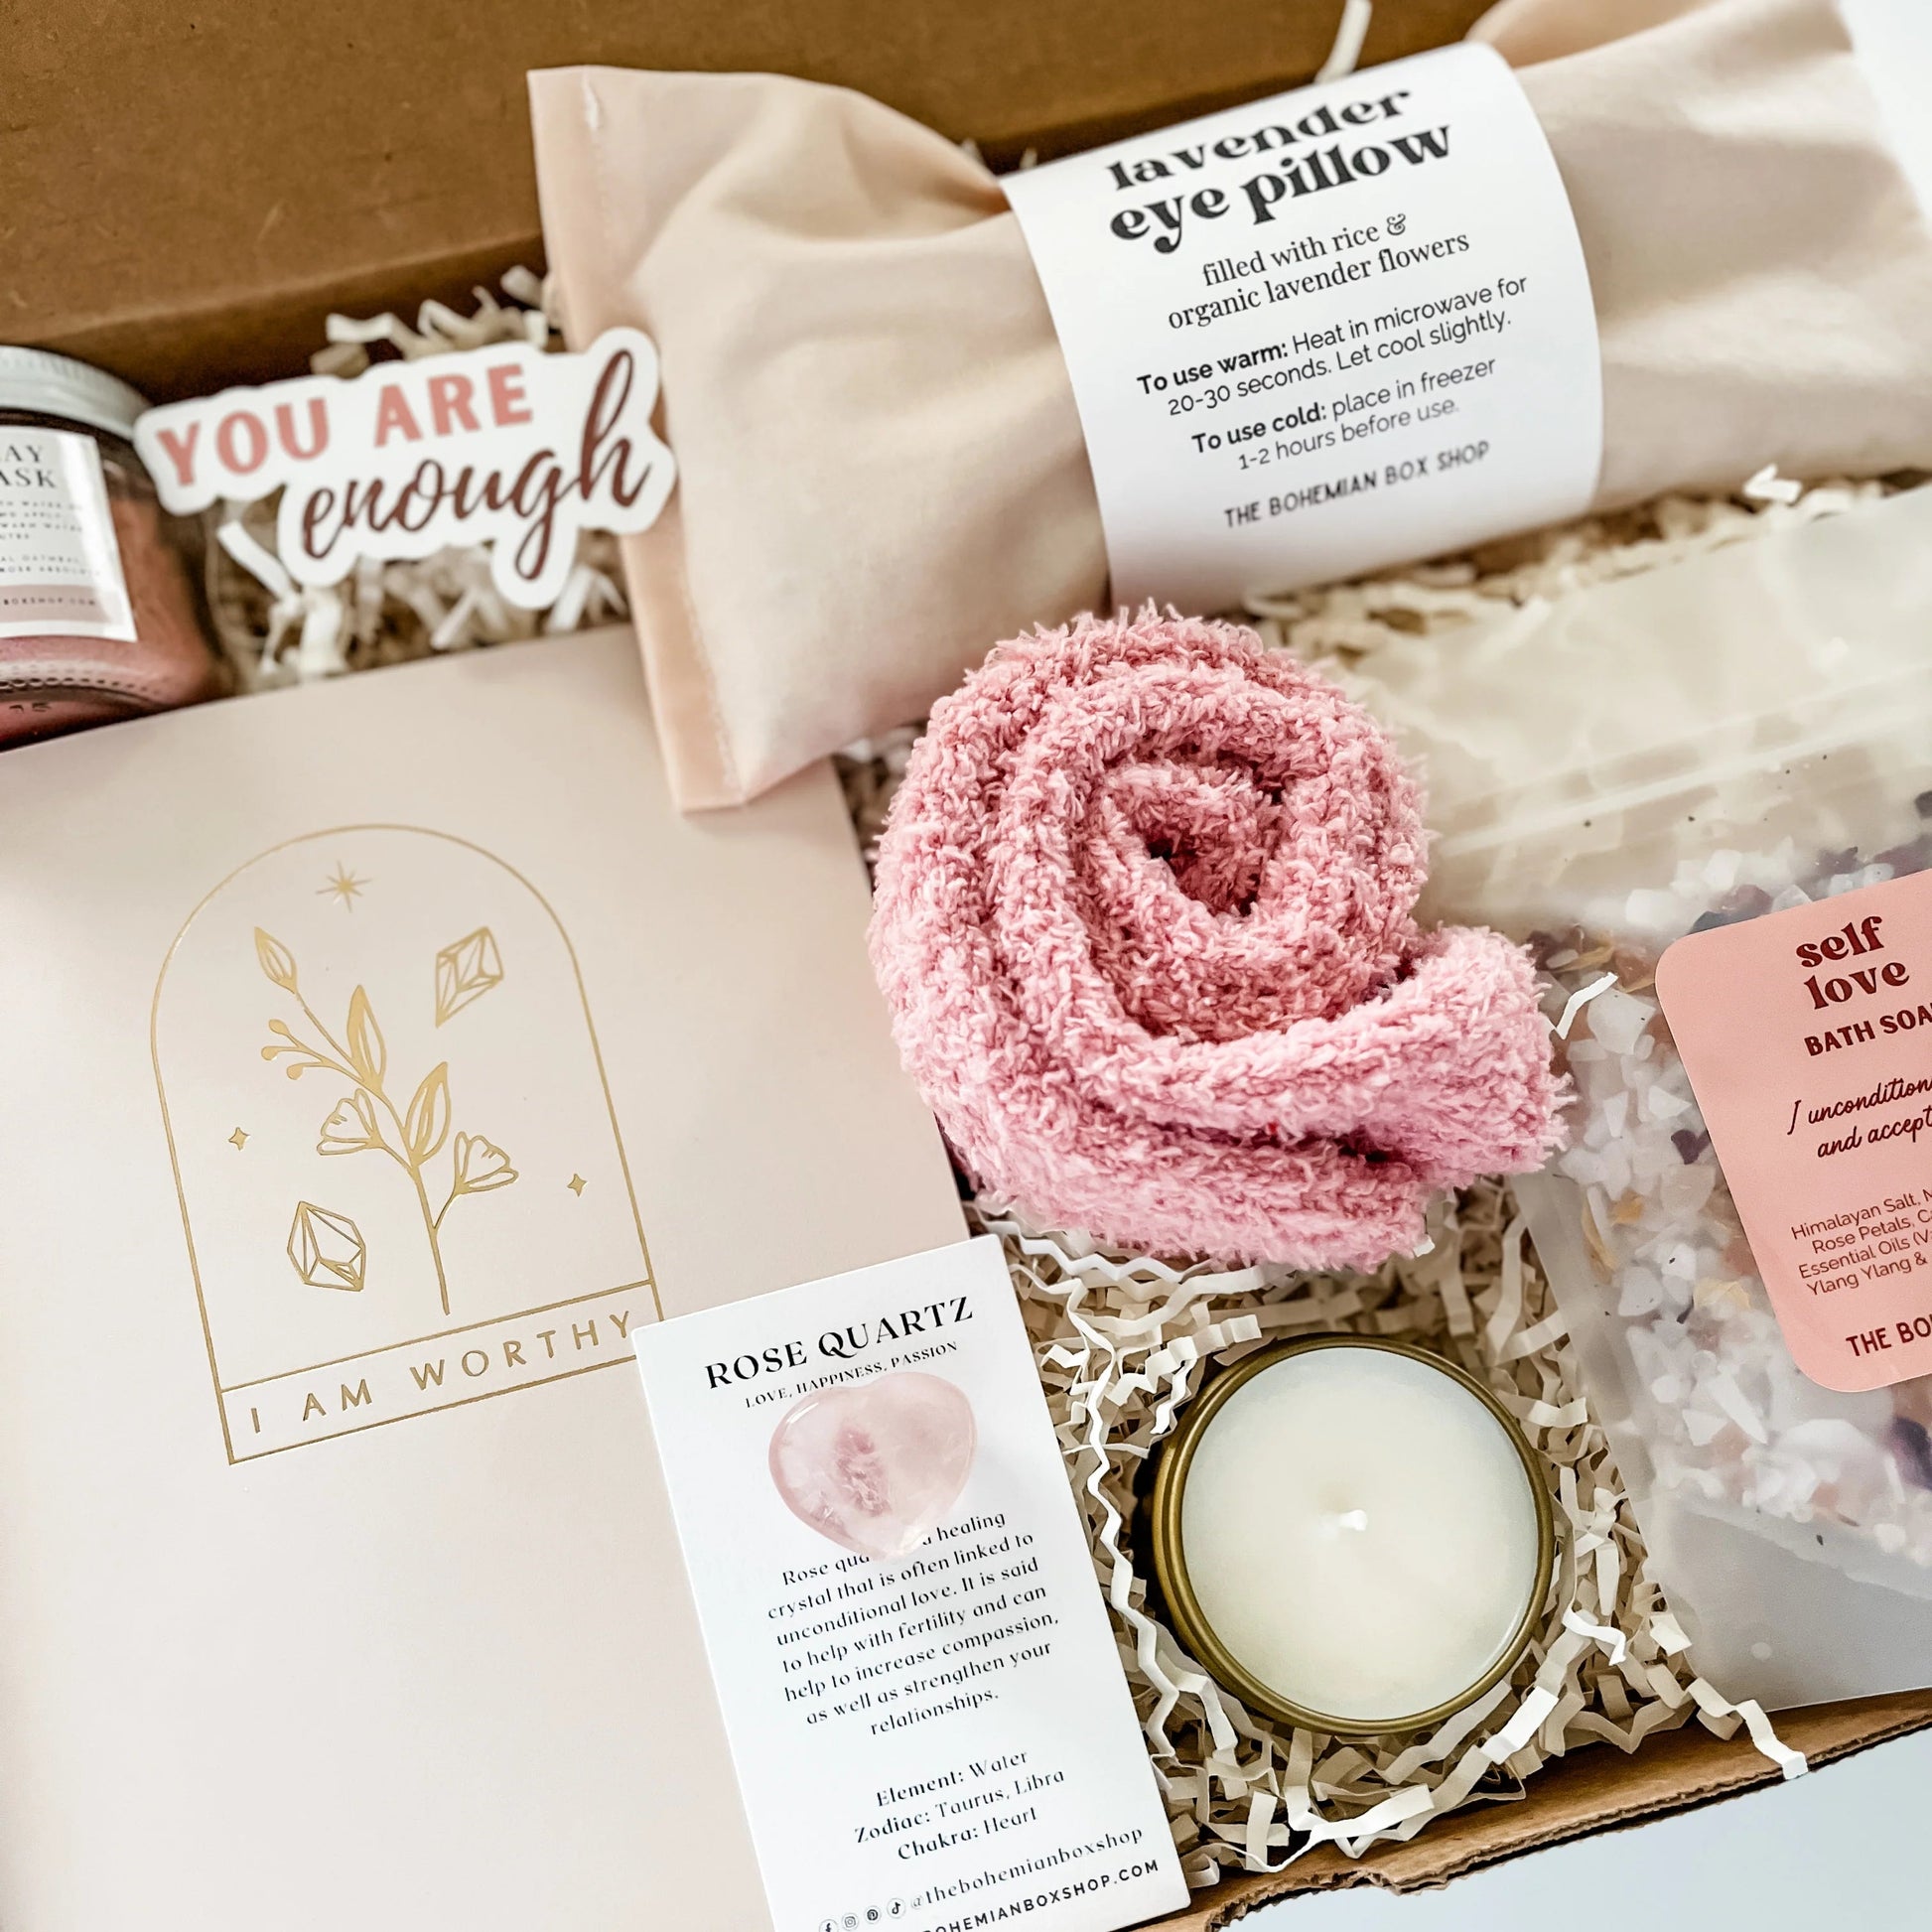 Self Love Care Package - I Am Worthy Gift Set